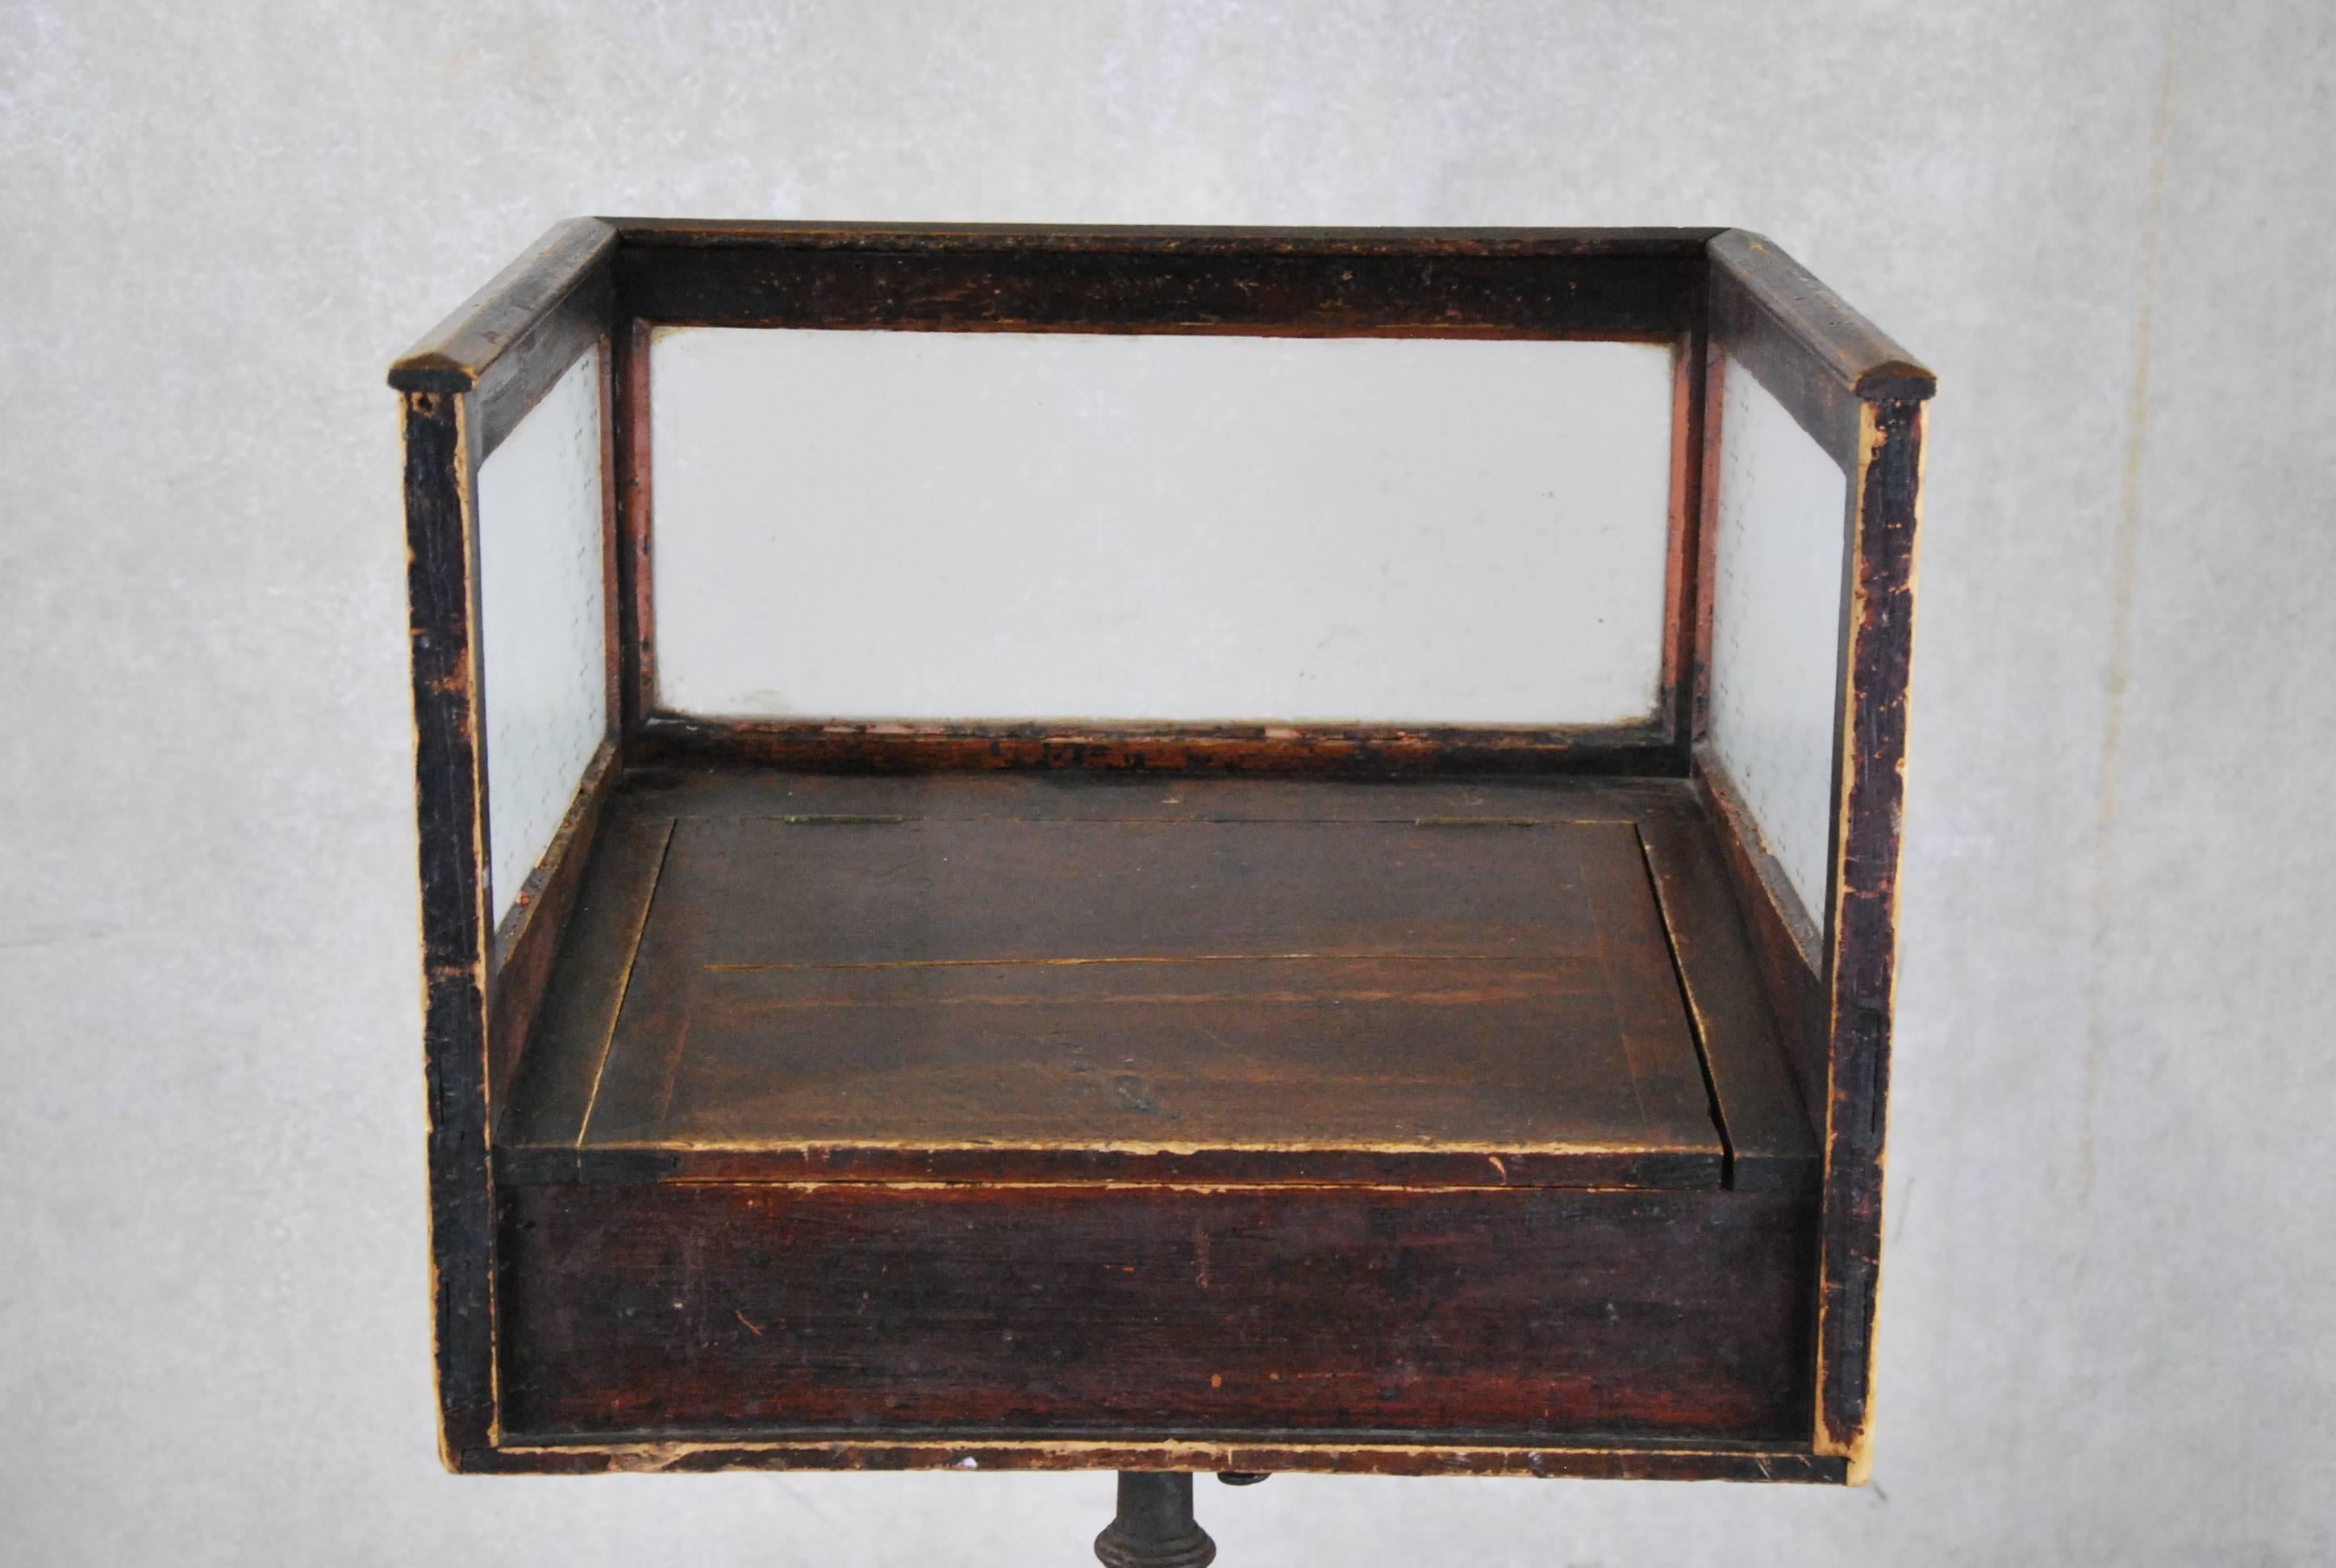 Very nice wooden cubicle with etched glass sides and lift top working drawer. 
This wooden gem rest upon a nice 1900 cast iron base in original patina.

Make an ideal small hostess stand.
 